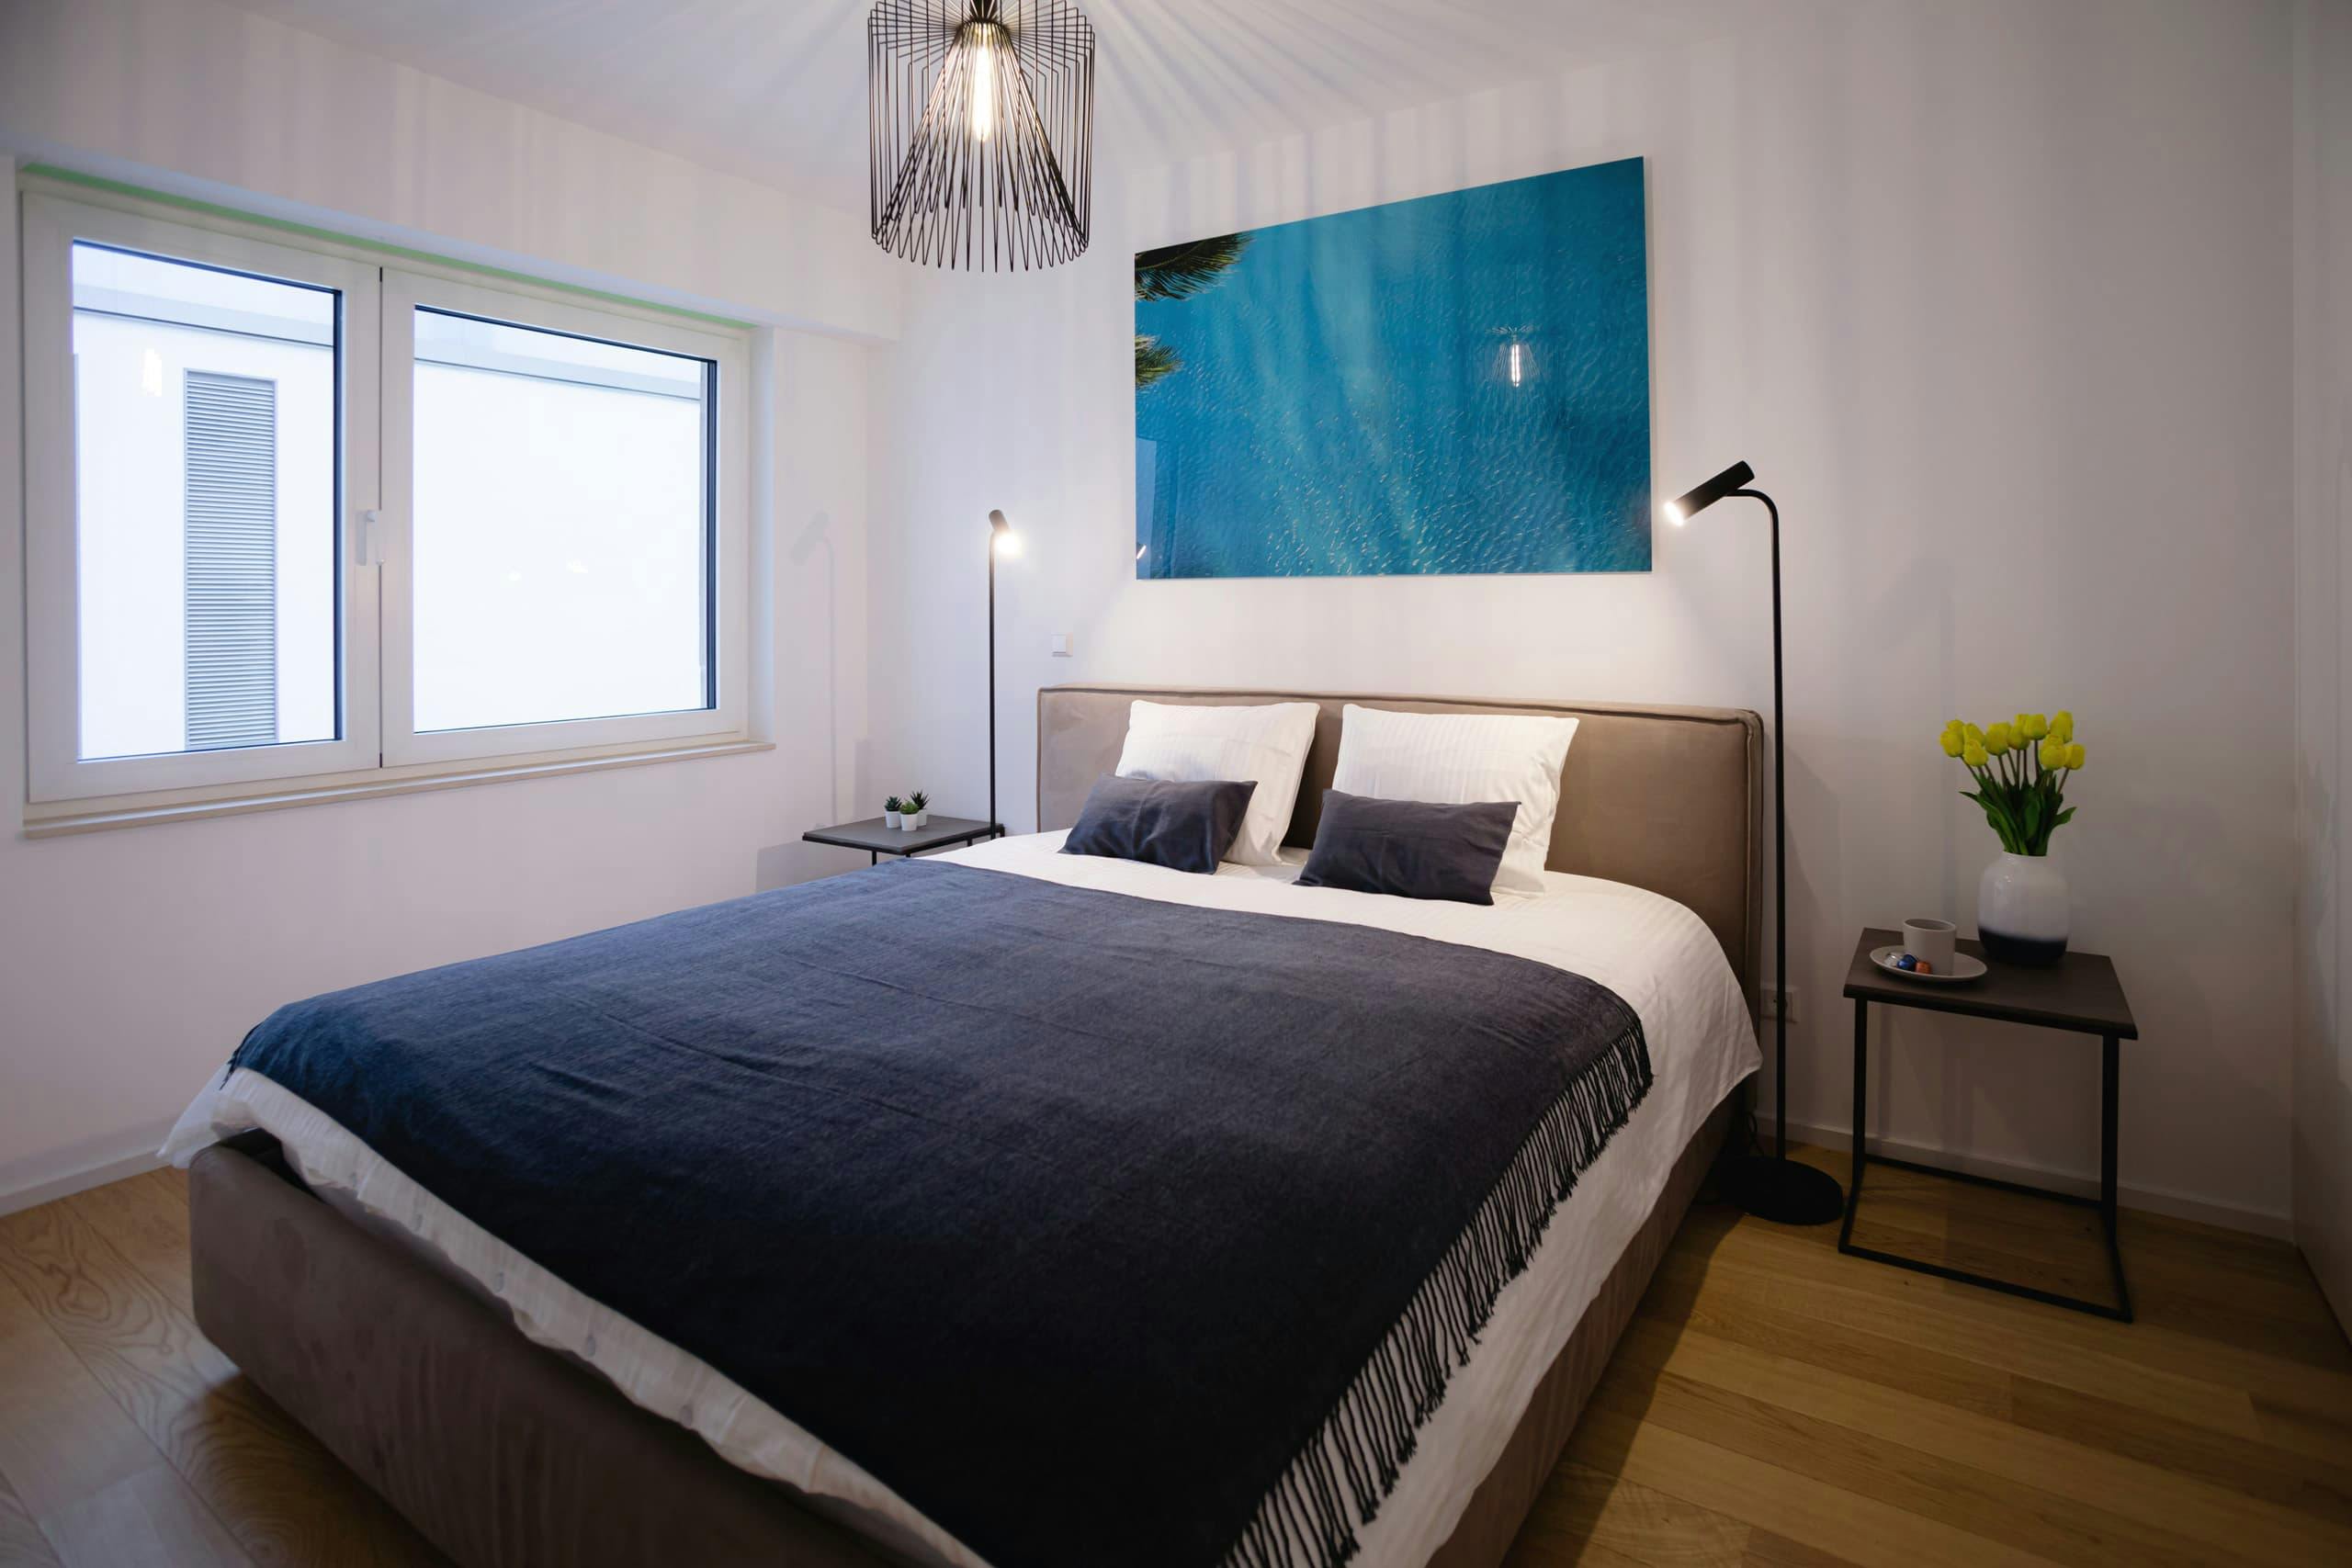 Bed with white sheets and blue cover, flanked by two lamps and nightstands. A blue sea picture hangs on the wall, behind the bed. On its right, there's a window.